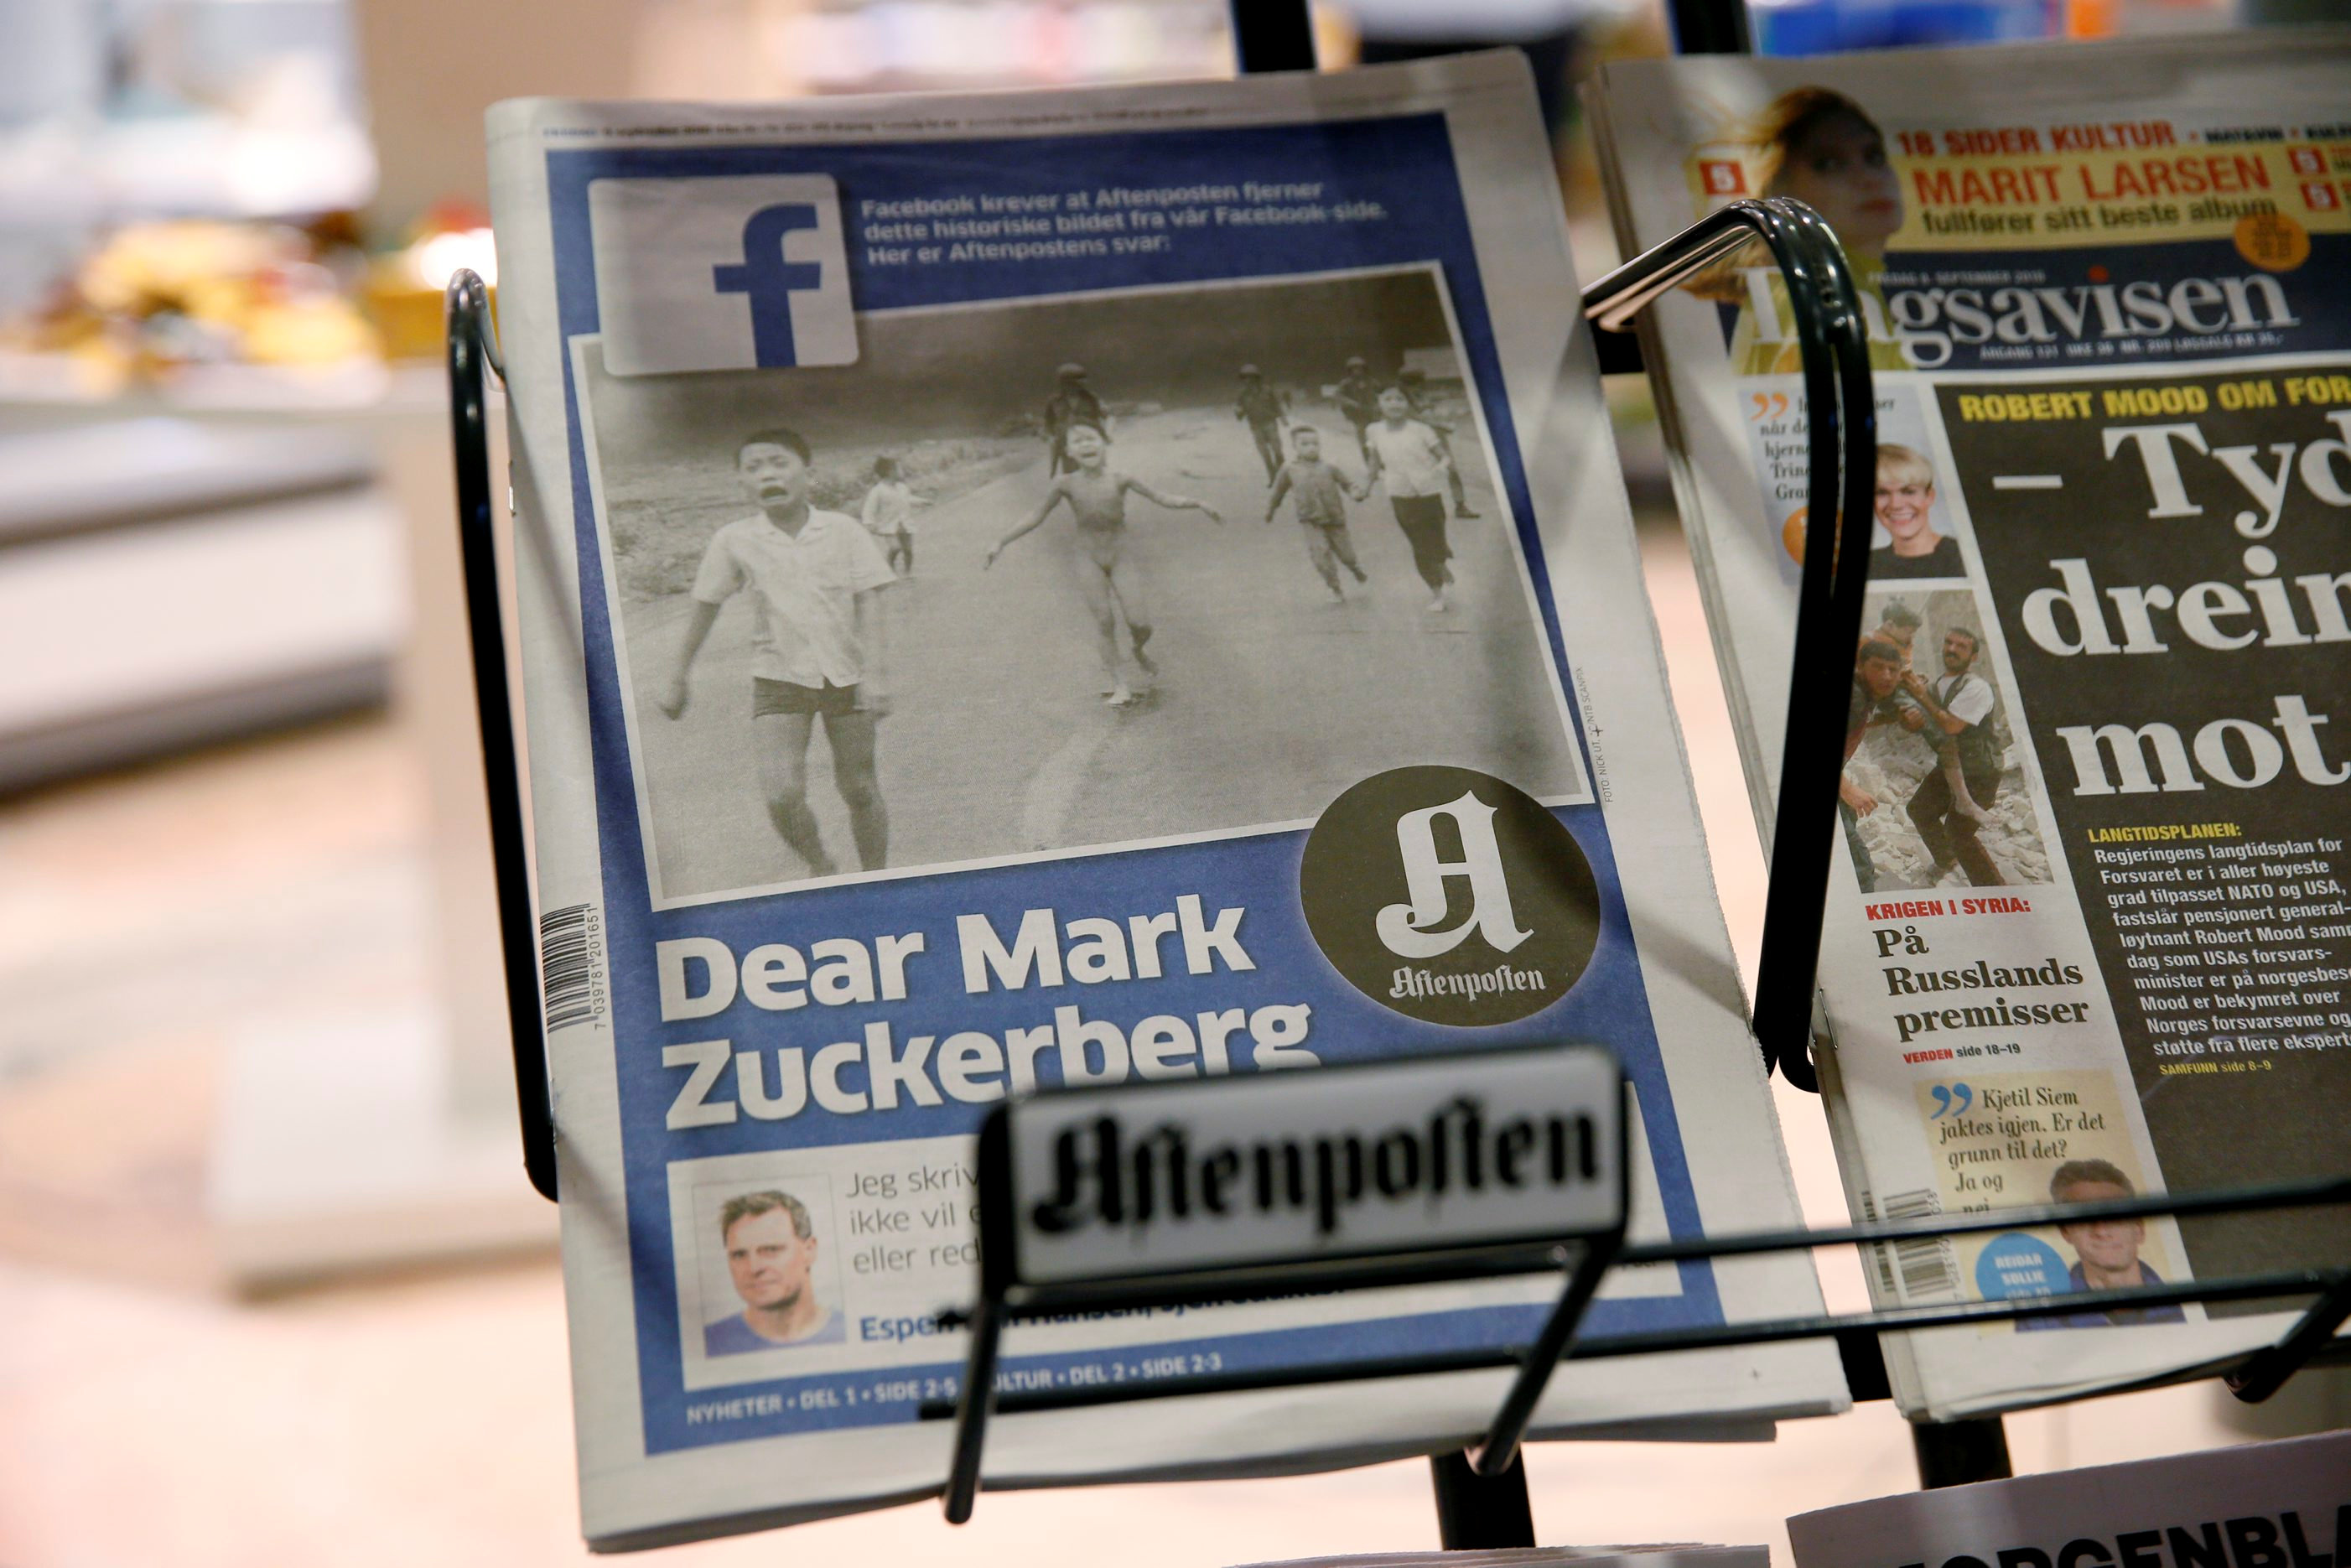 The front cover of Norway's largest newspaper by circulation, Aftenposten, is seen at a news stand in Oslo, Norway September 9, 2016. Editor-in-chief and CEO, Espen Egil Hansen, writes an open letter to founder and CEO of Facebook, Mark Zuckerberg, accusi